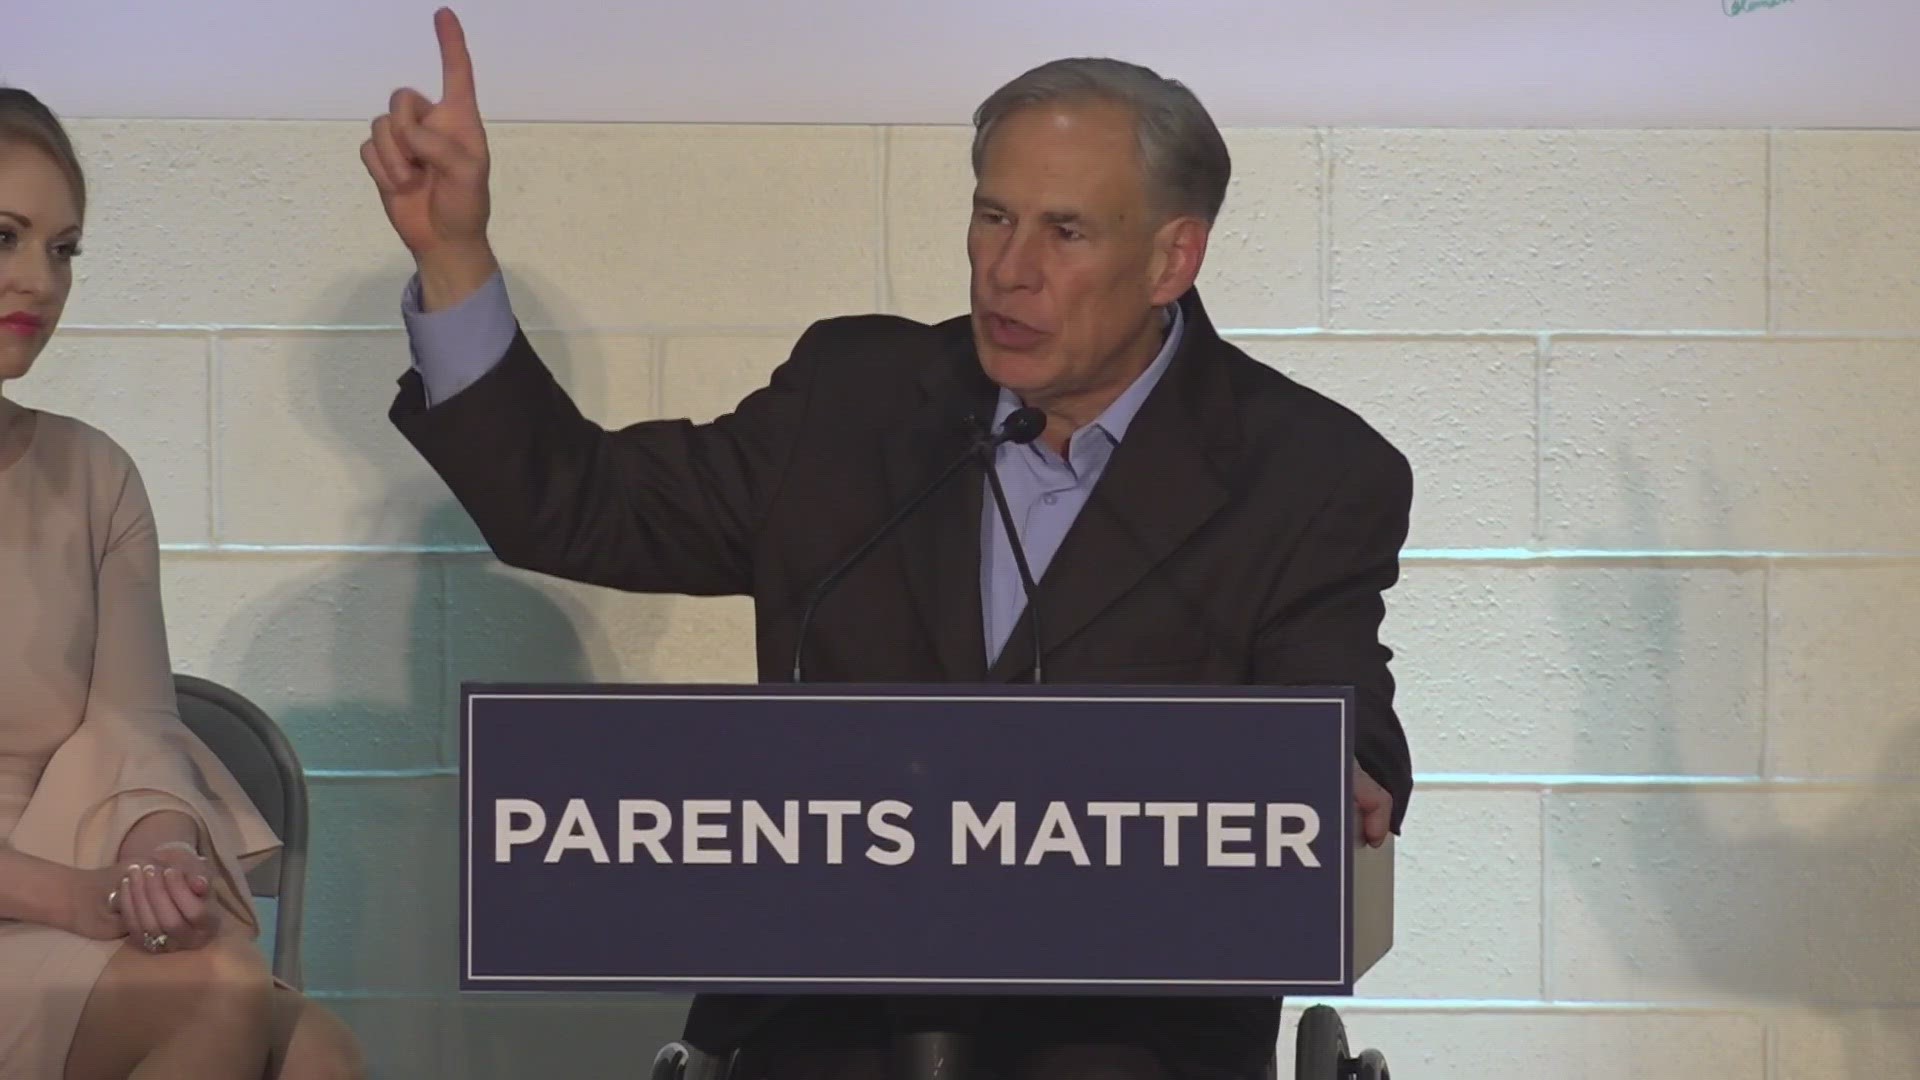 The governor discussed the importance of parents having school choice for their children's education and the support it has around the State of Texas.